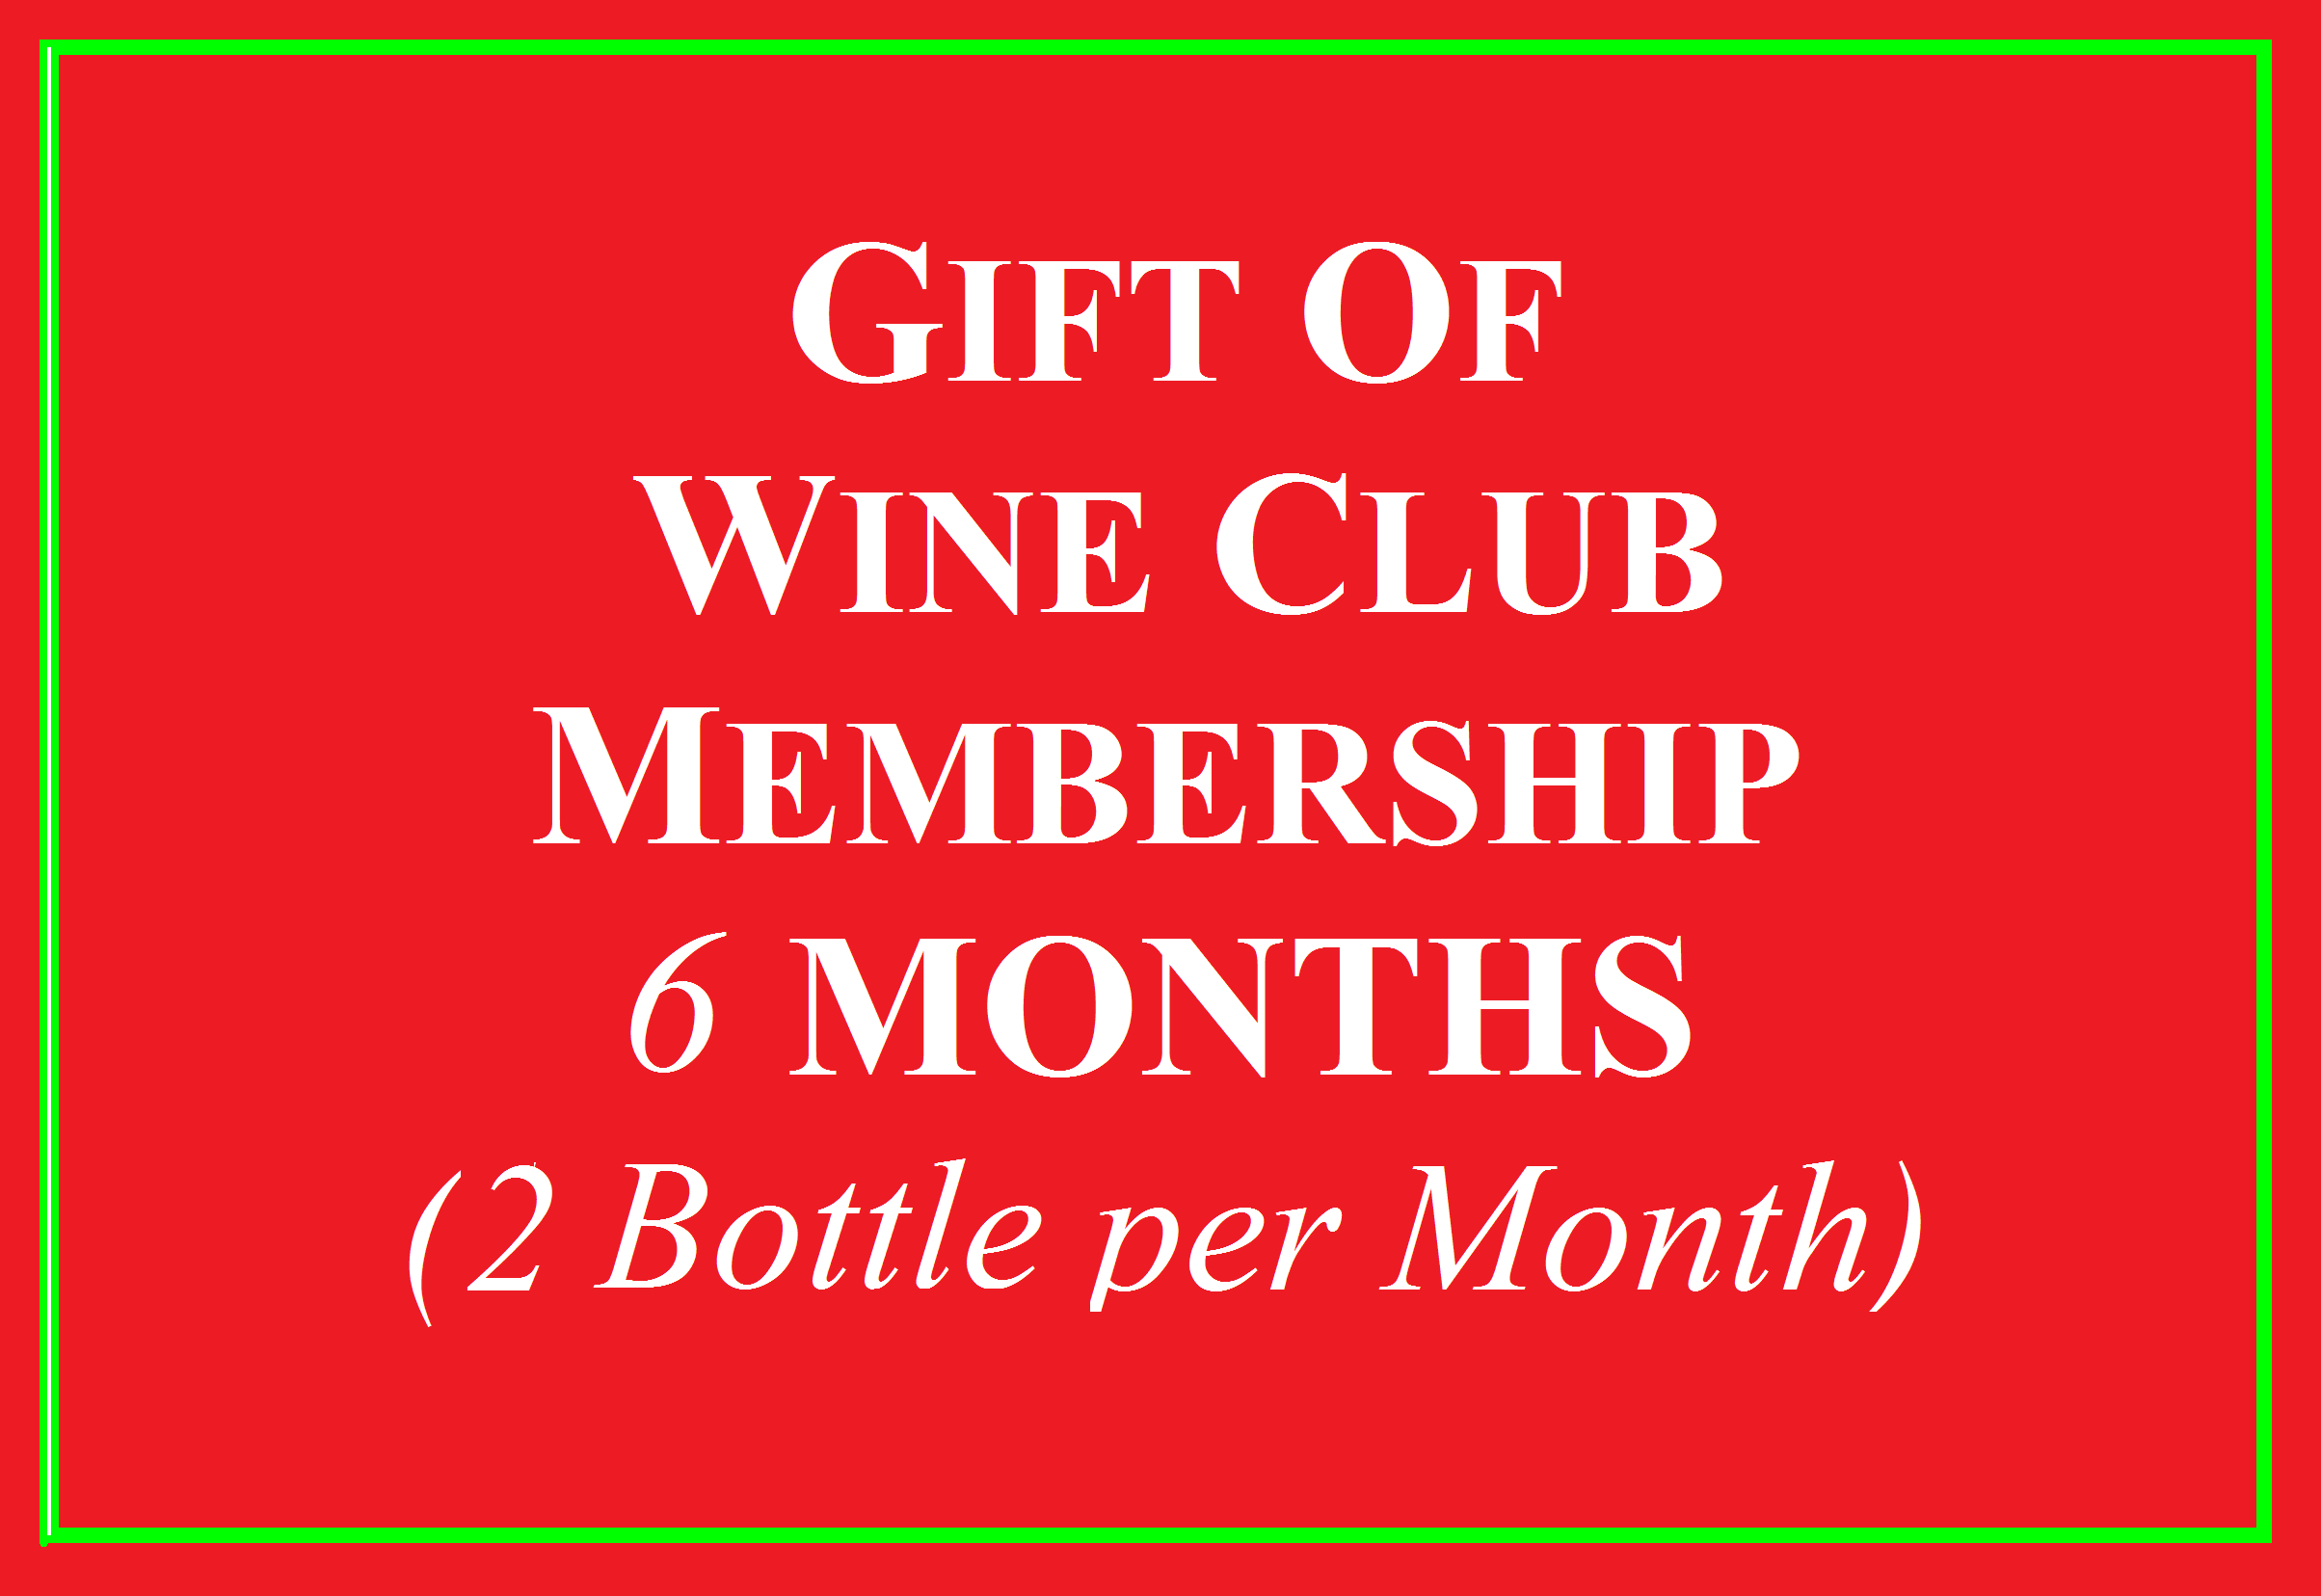 Wine Club Gift for 6 Months 2 Bottle